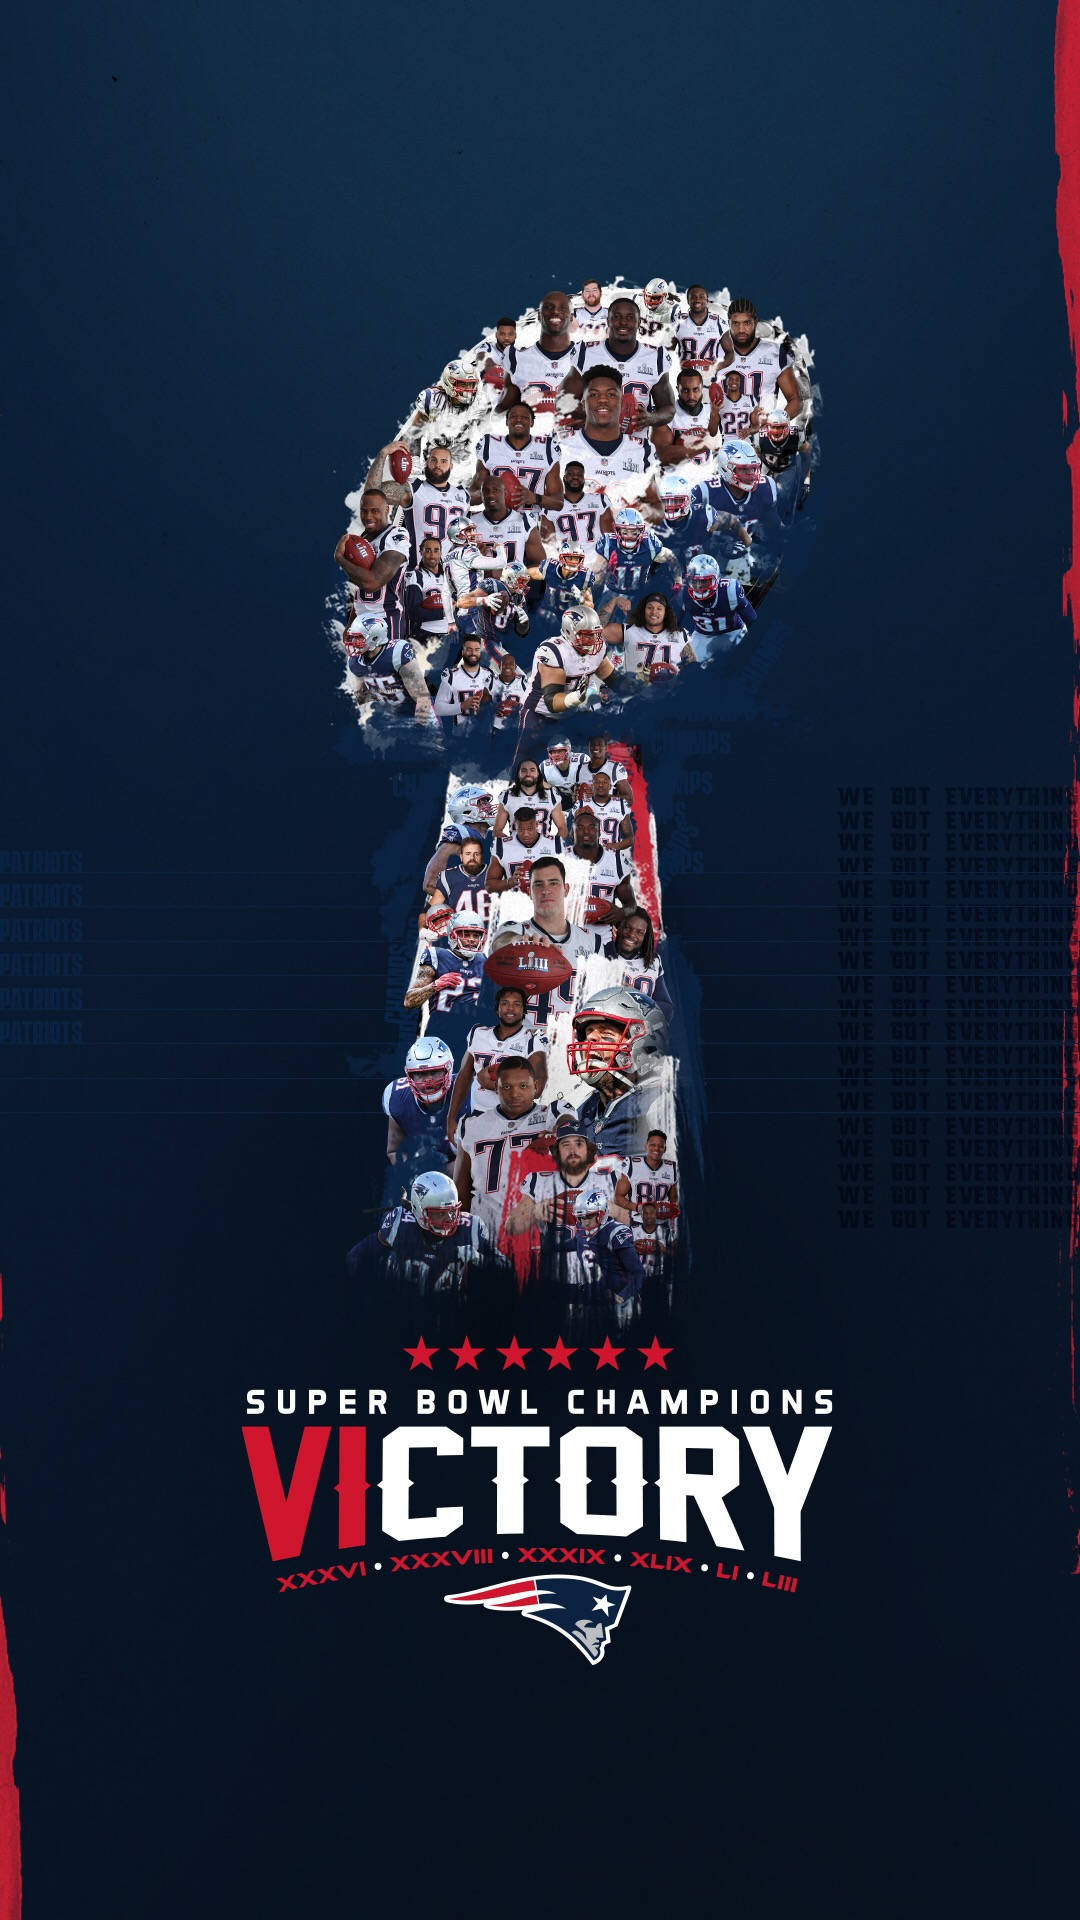 The Super Bowl Champions Victory Poster Wallpaper